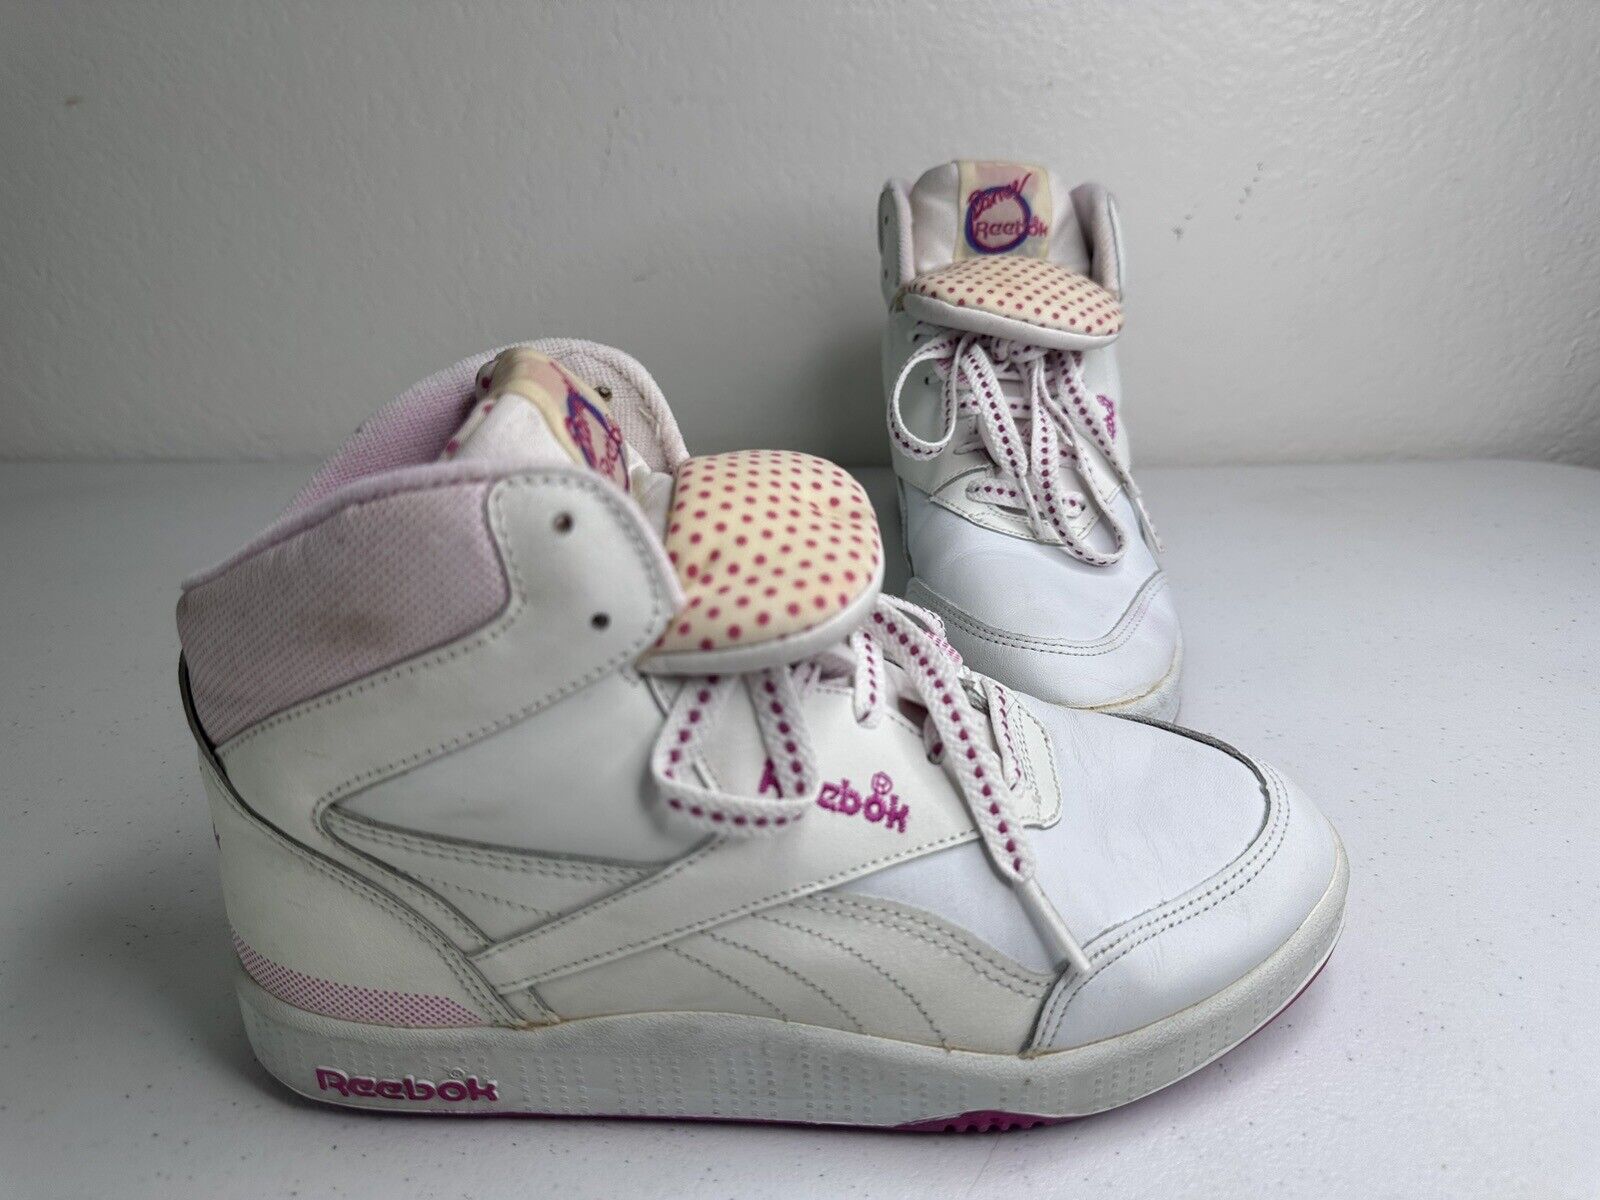 Vintage 1980s Reebok Freestyle Hi-top Dance Sneakers, Women's Size 5 - Iconic Pink & White Retro Athletic Shoes - TreasuTiques